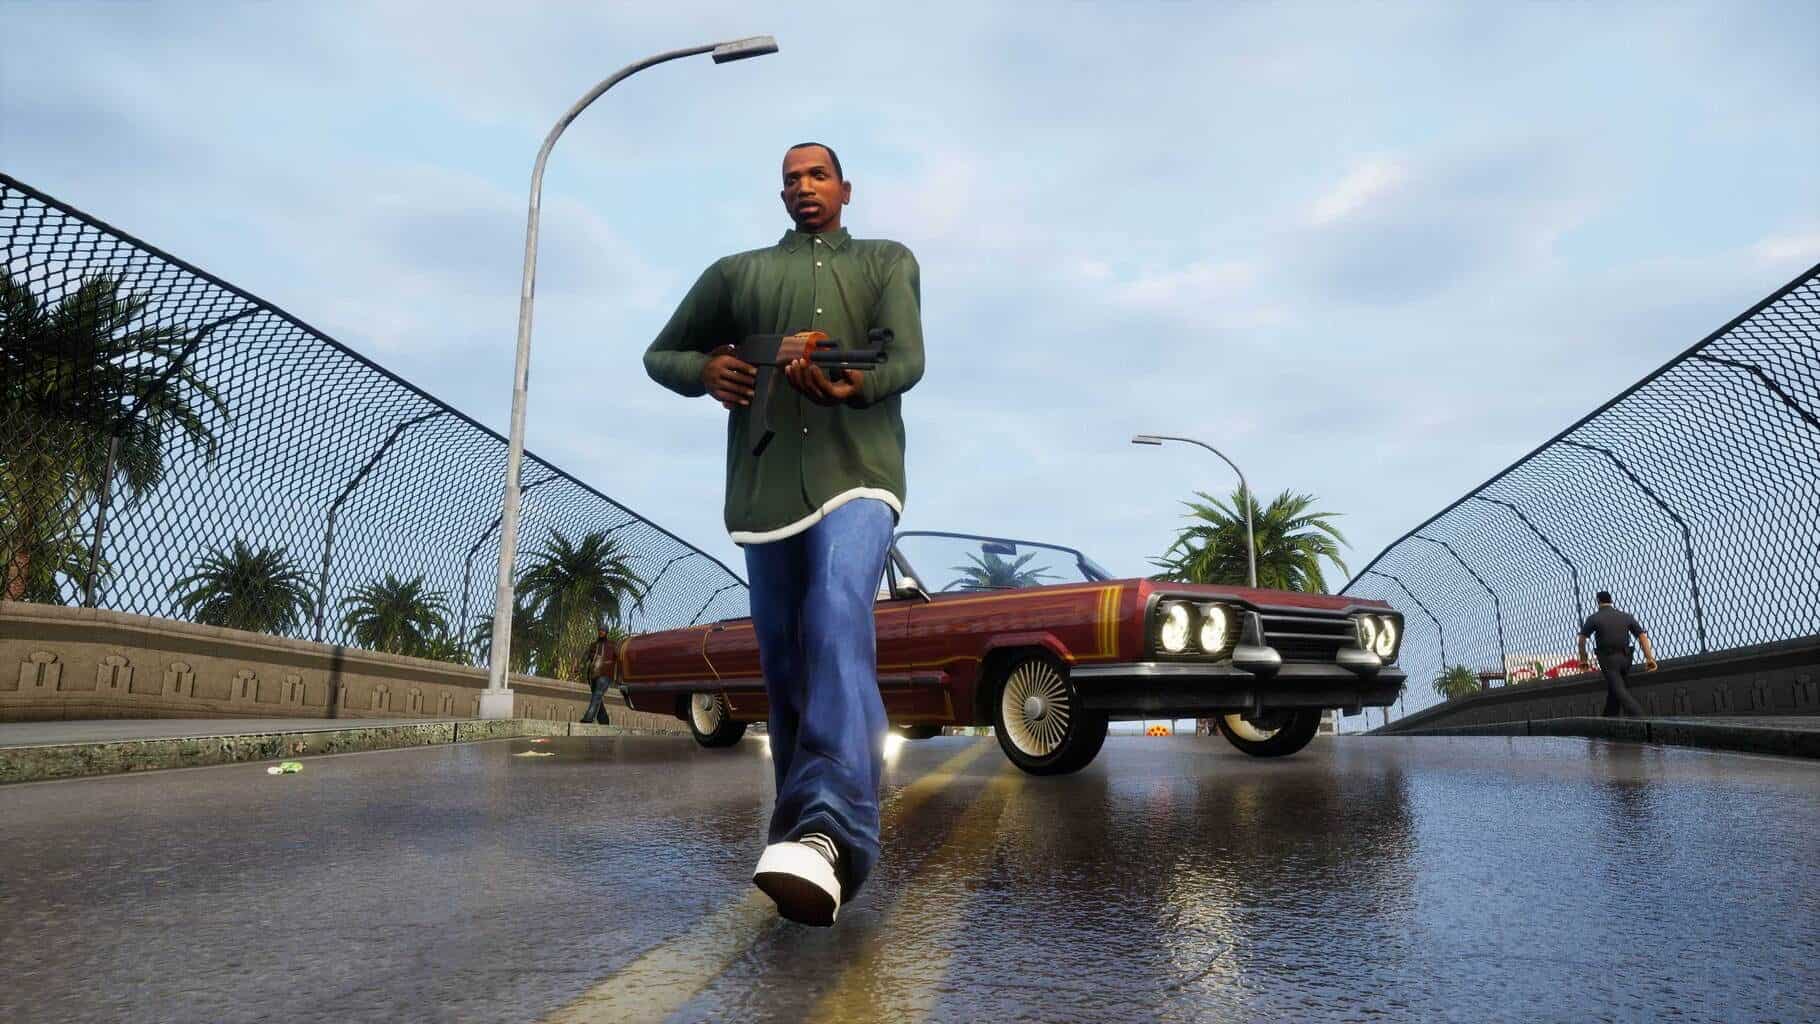 First Look at 2 Player Deluxe - Always Coop in GTA San Andreas PC 